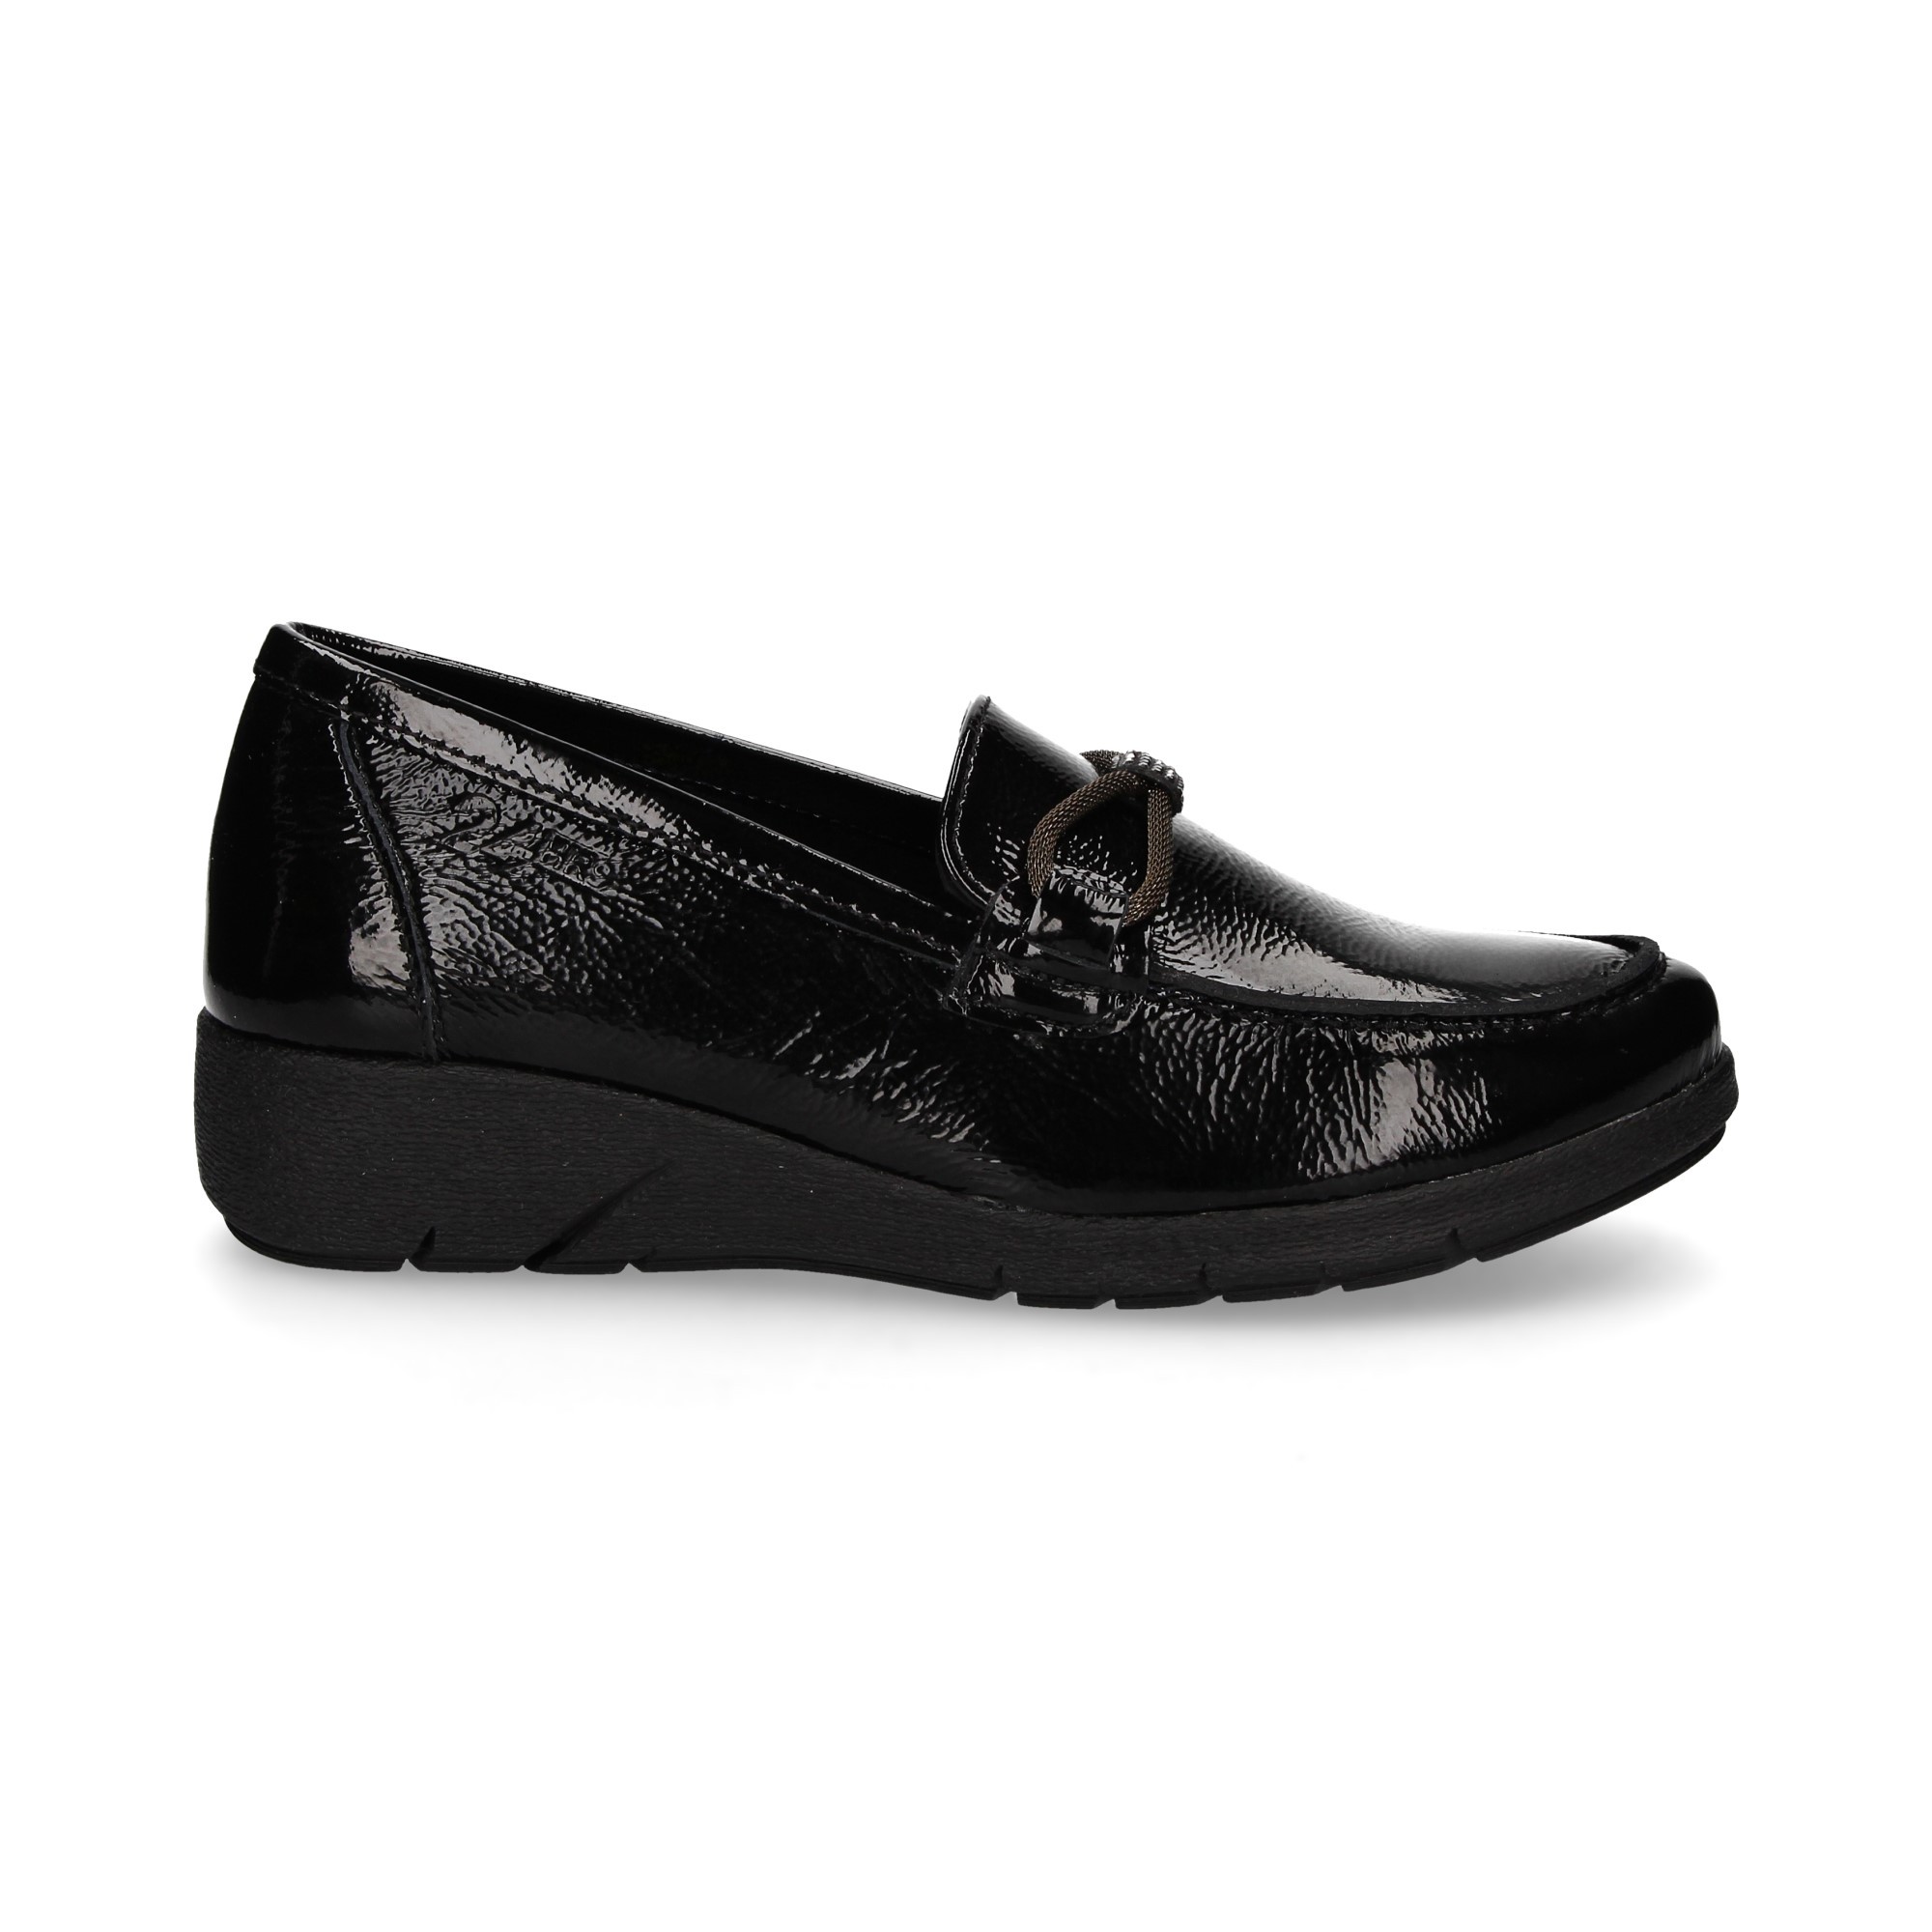 moccasin-wedge-link-moccasin-strass-black-patent-leather